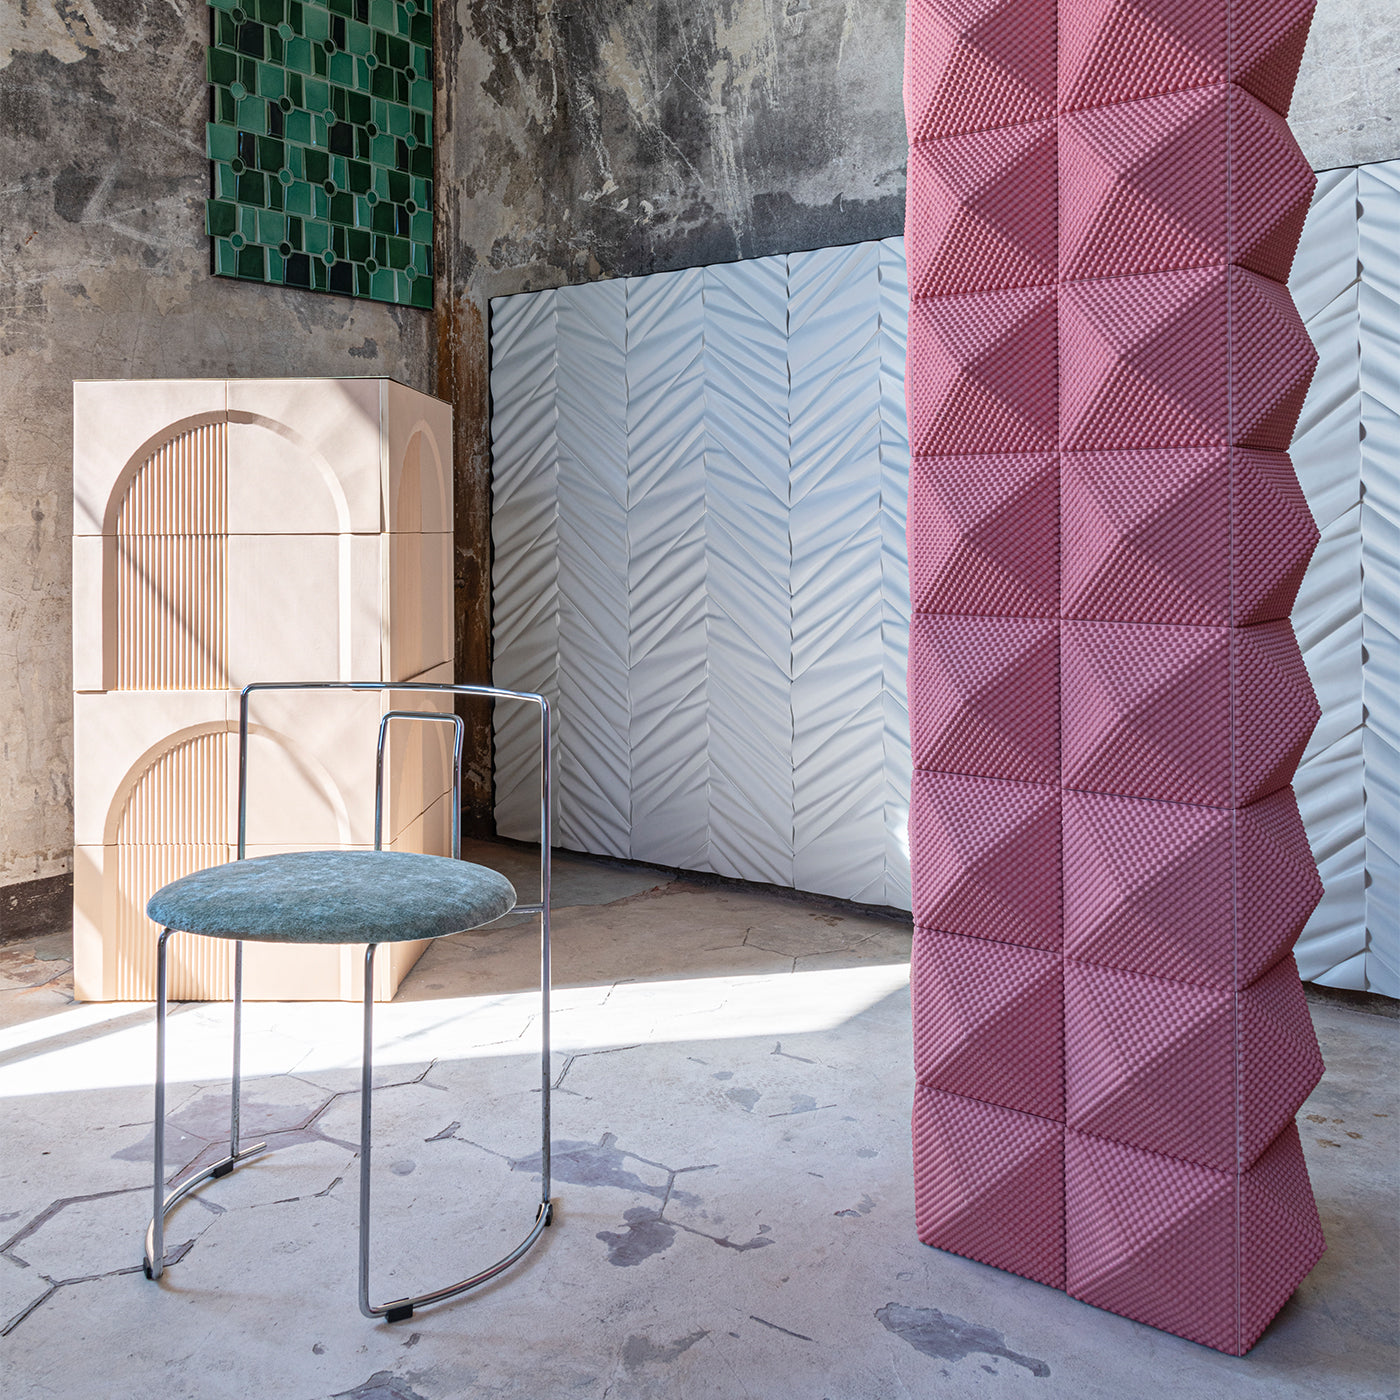 Cross 20 Pink Wall Covering by Marta Martino - Alternative view 1